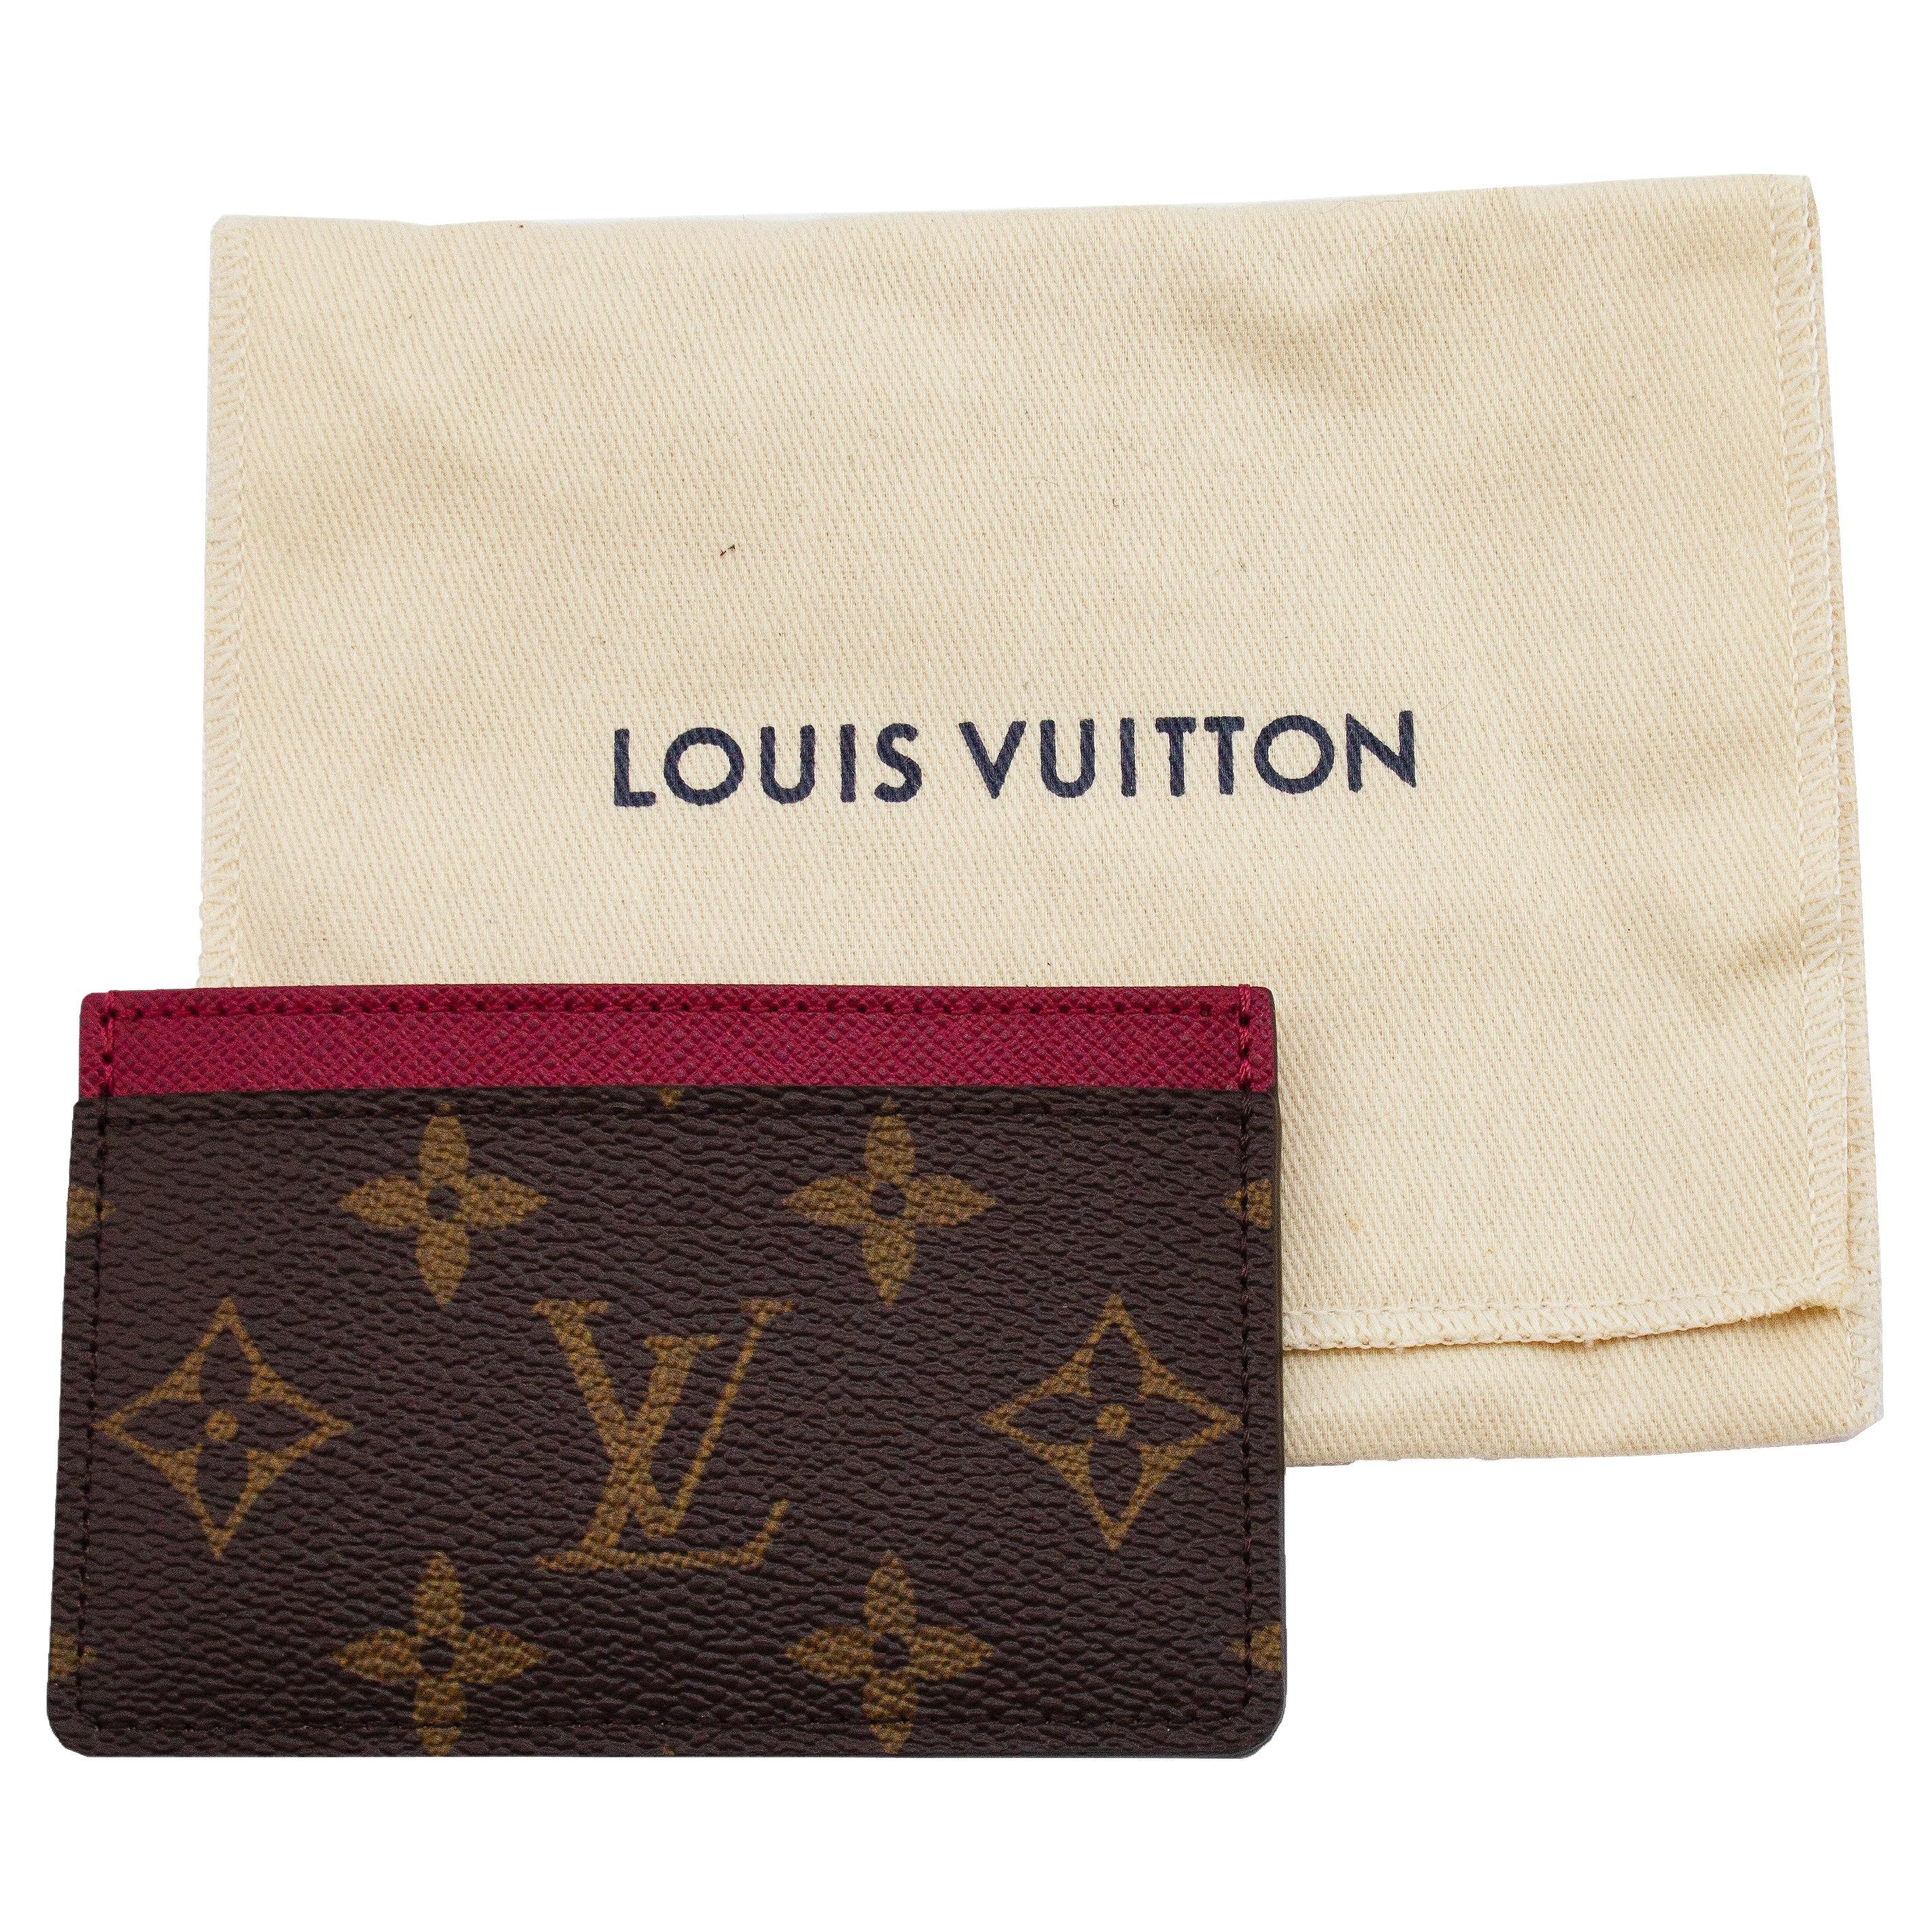 How do you authenticate a Louis Vuitton card holder? - Questions